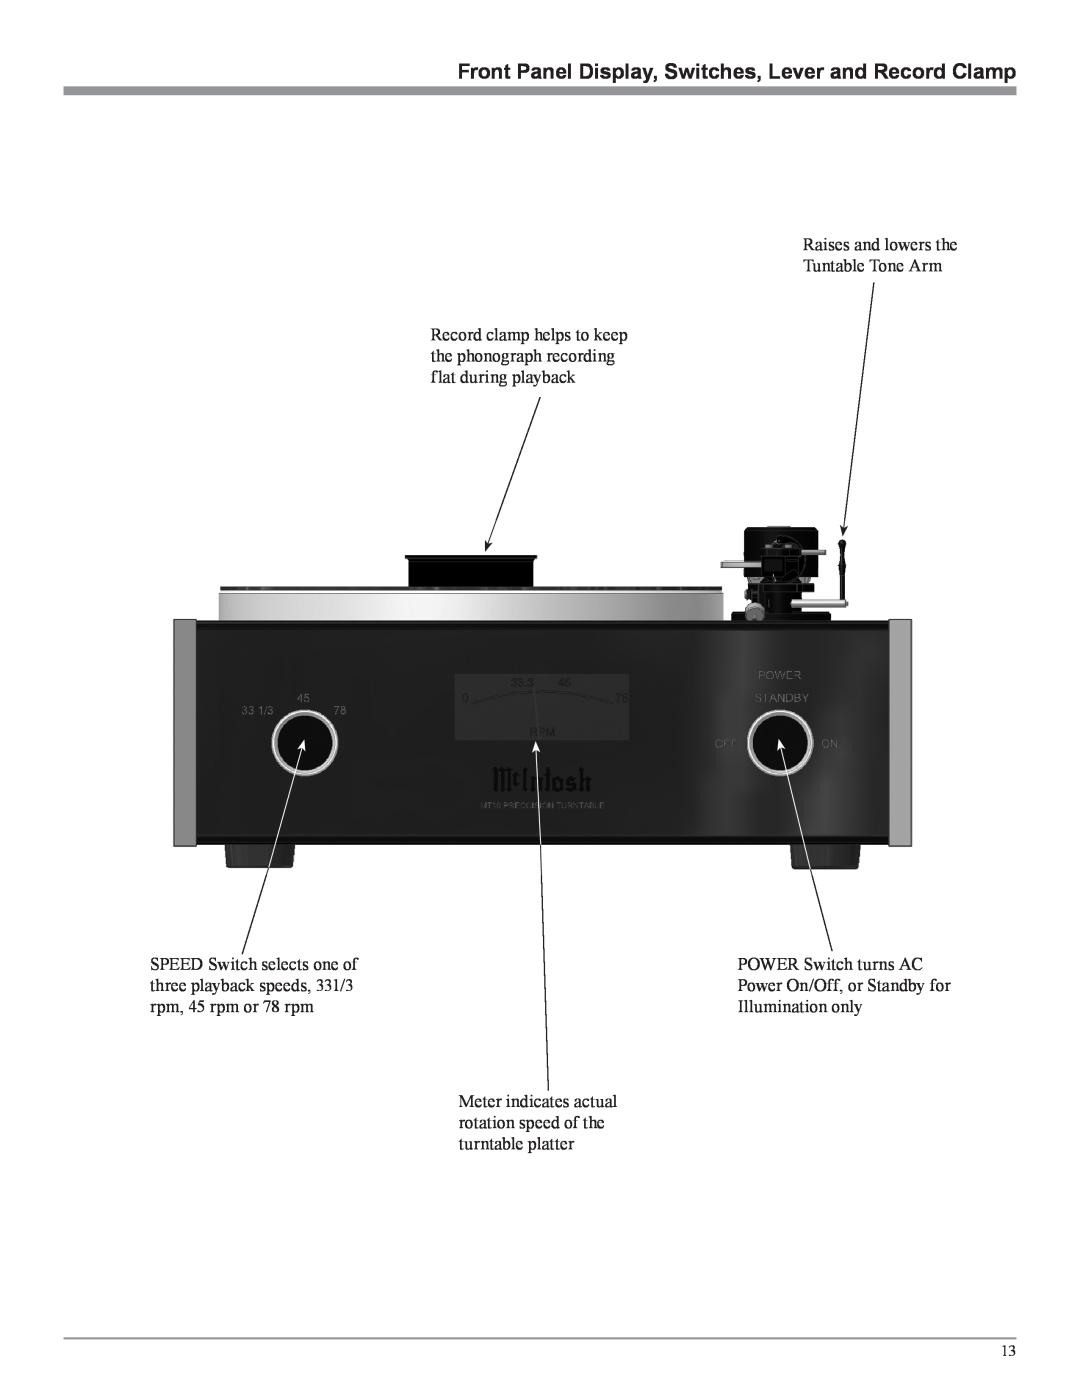 McIntosh MT10 owner manual Raises and lowers the Tuntable Tone Arm 